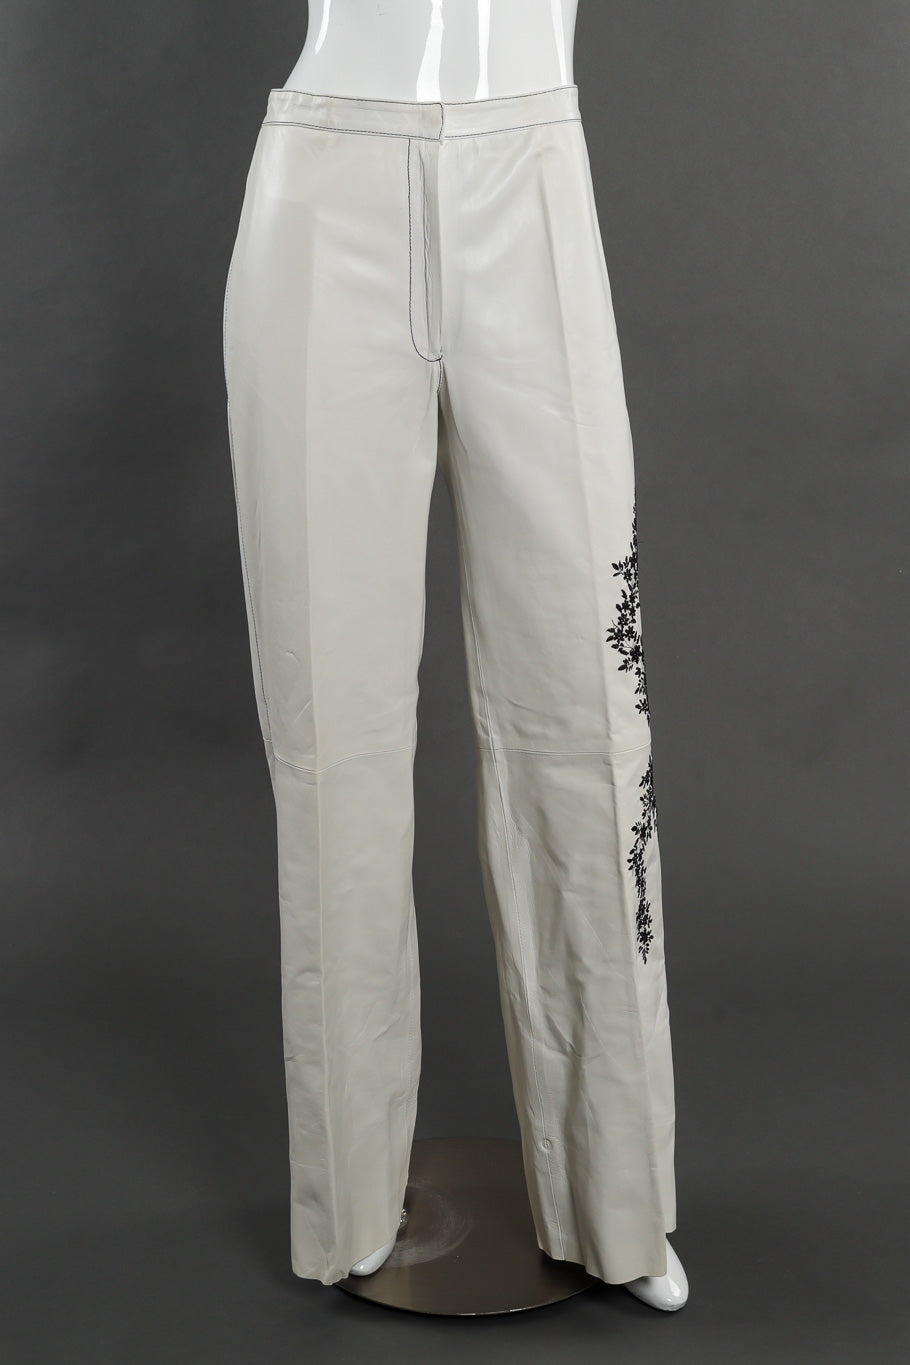 Vintage Estrella G Embroidered Leather Vest and Pant Set front view of pant on mannequin @Recessla